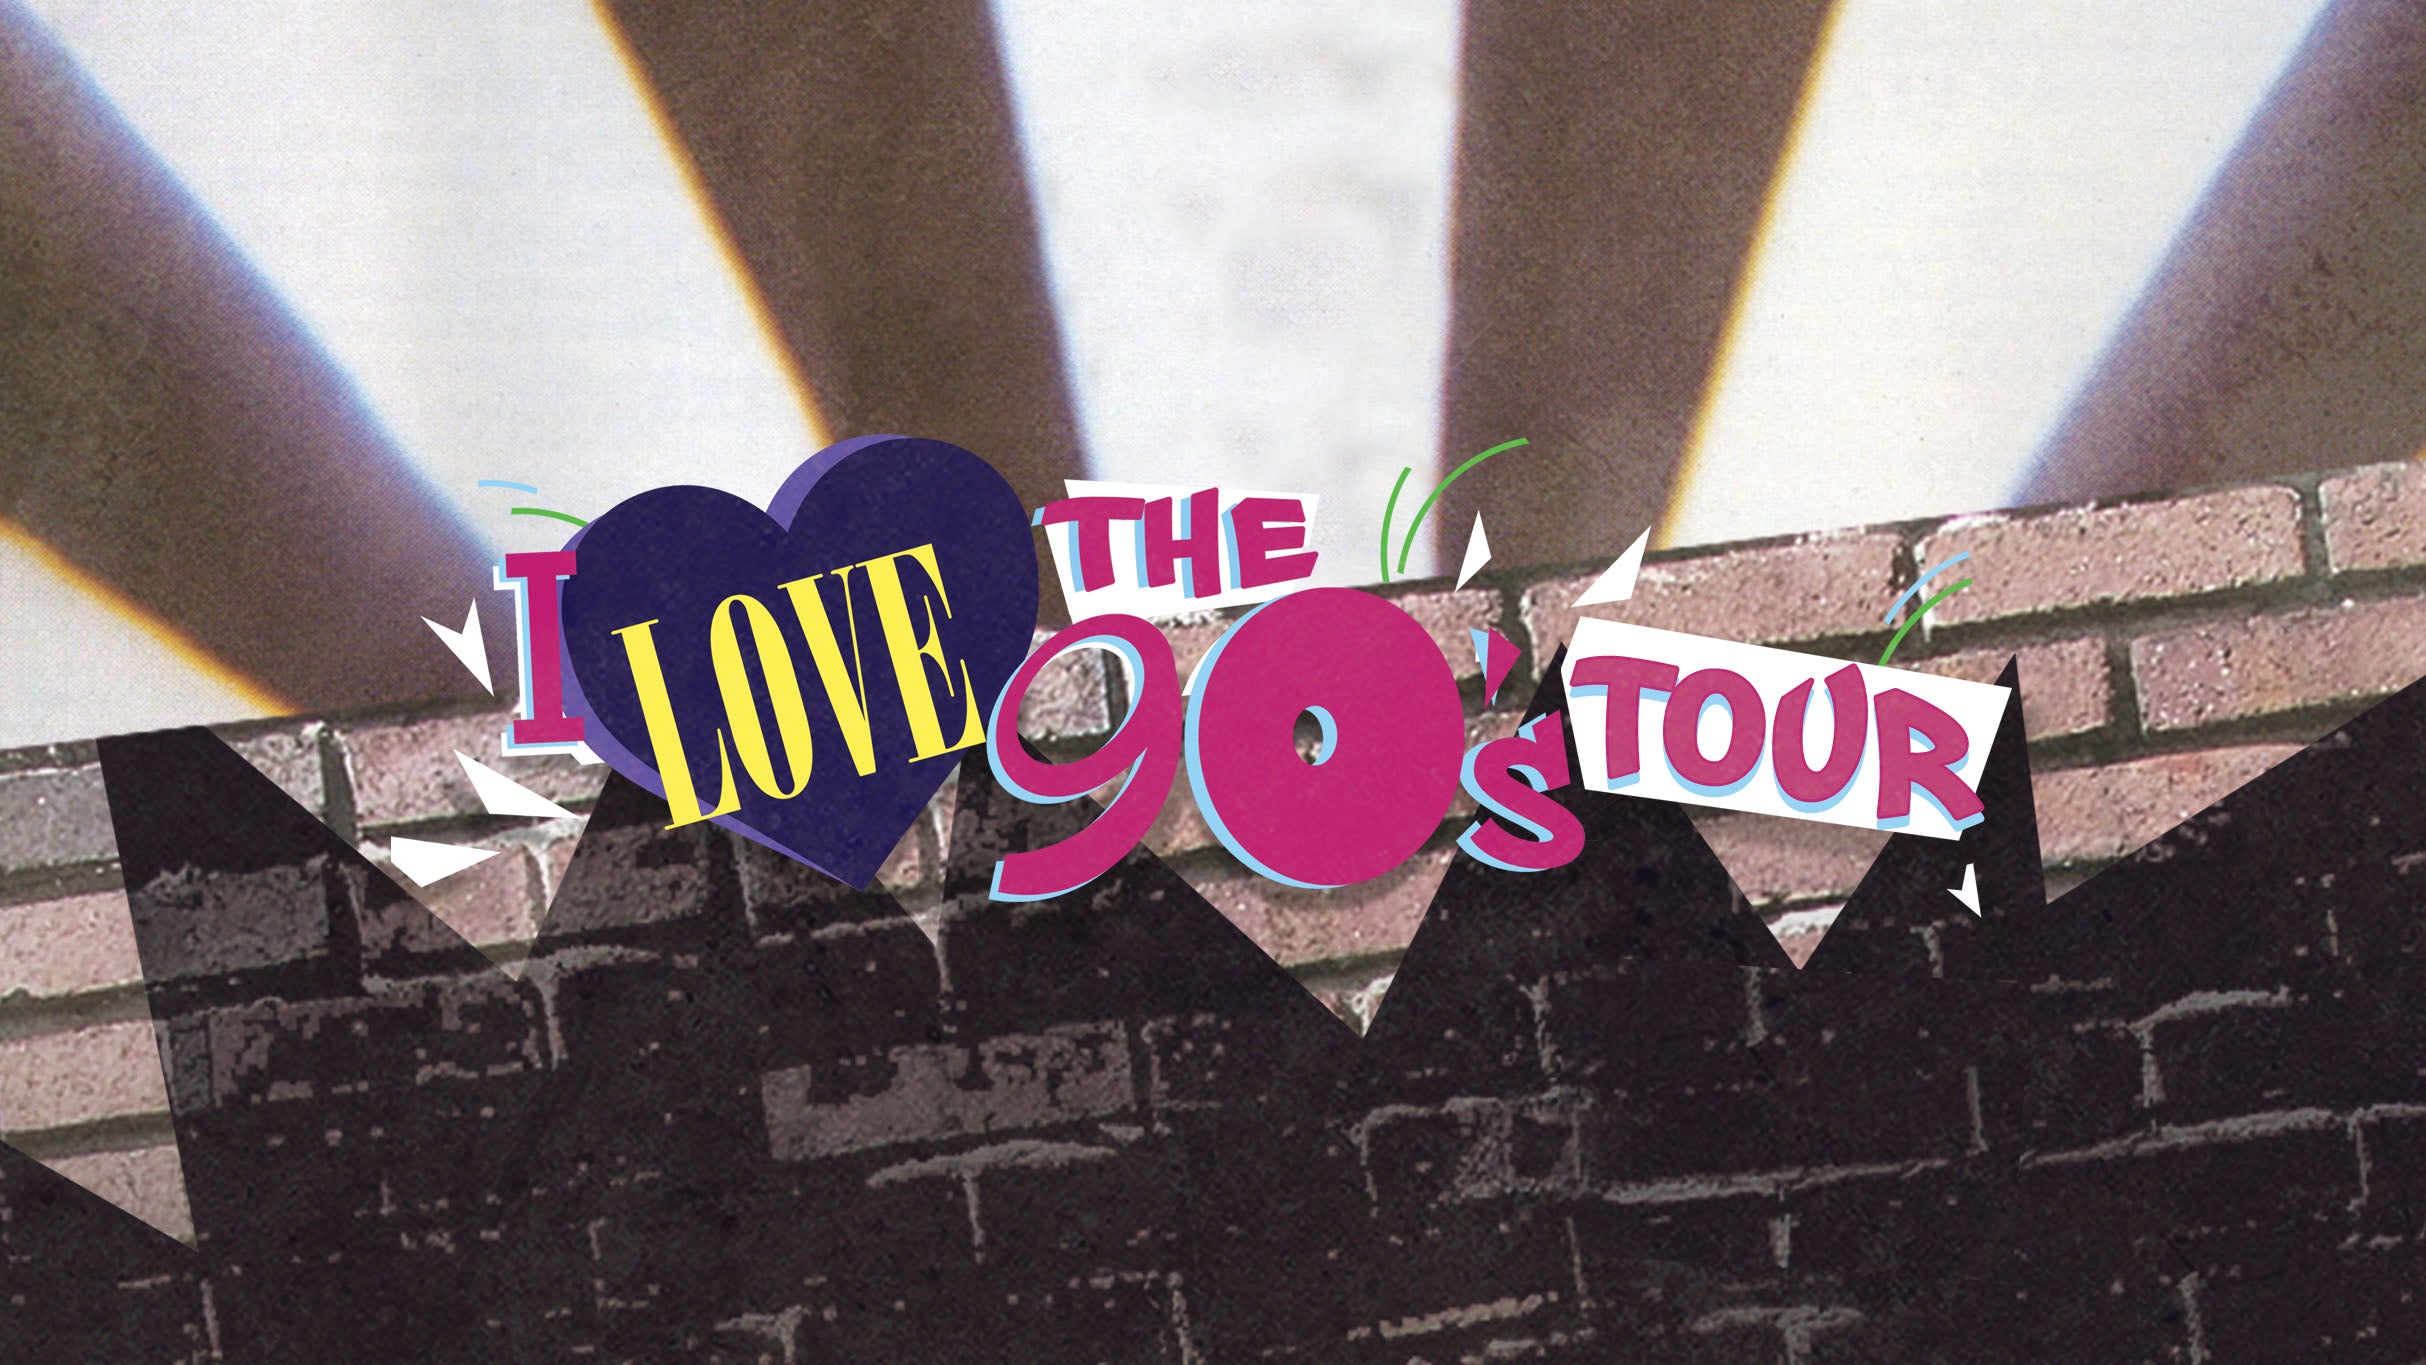 I Love The 90's Tour in Primm promo photo for Exclusive presale offer code